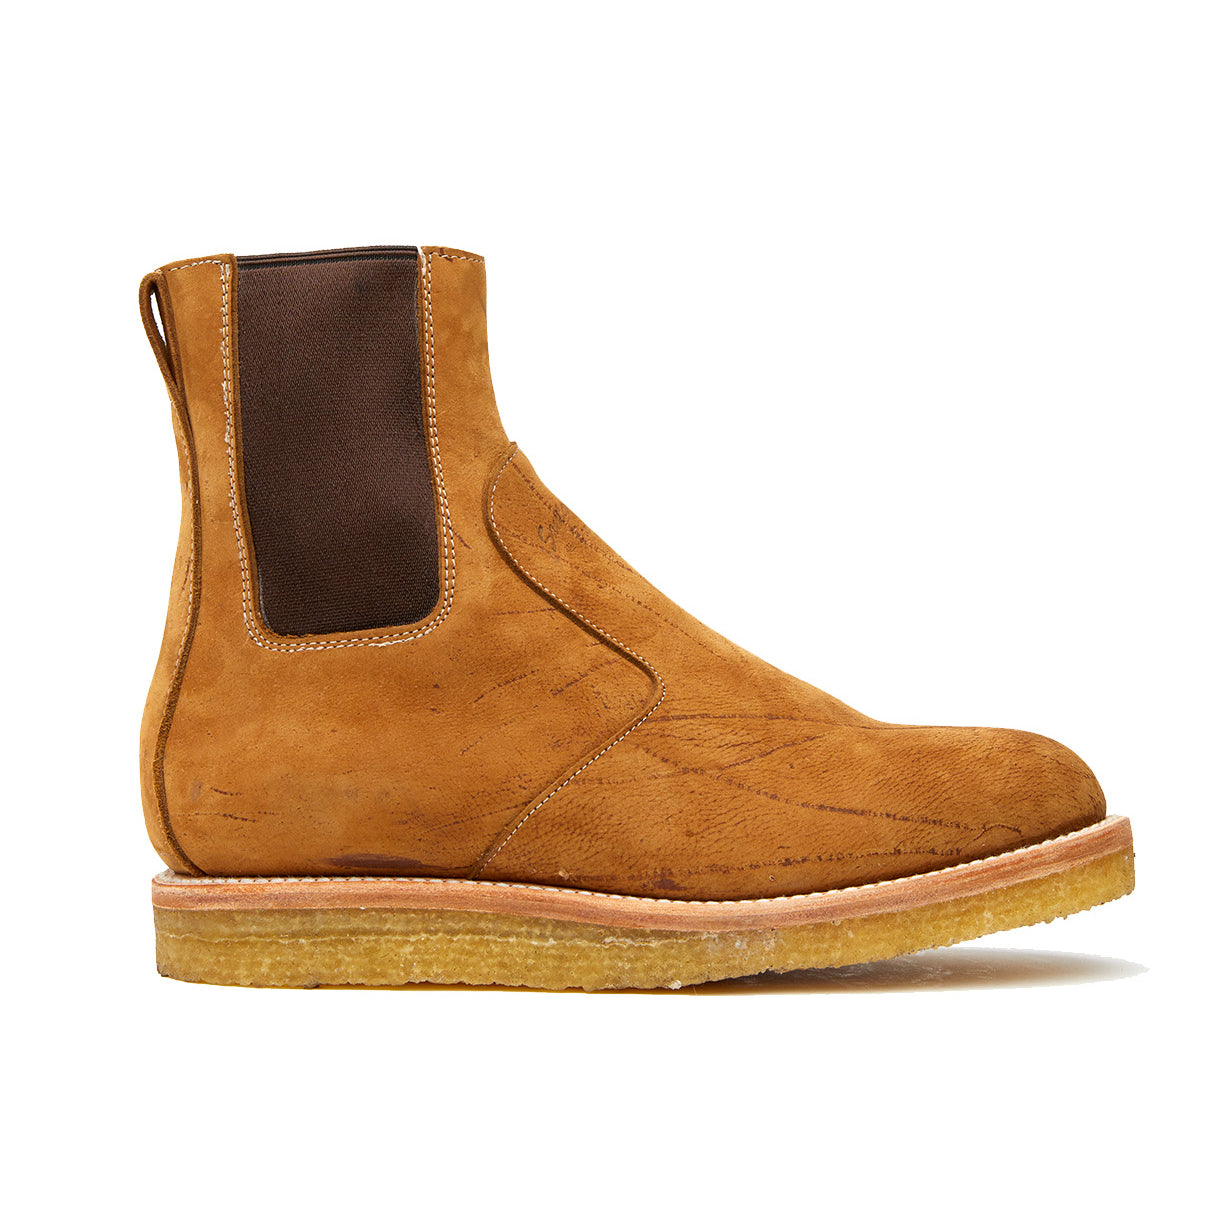 Santa Rosa Brand Stamford Boot Peanut Kudu in tan veg tan leather with elastic side panel and natural crepe outsole.